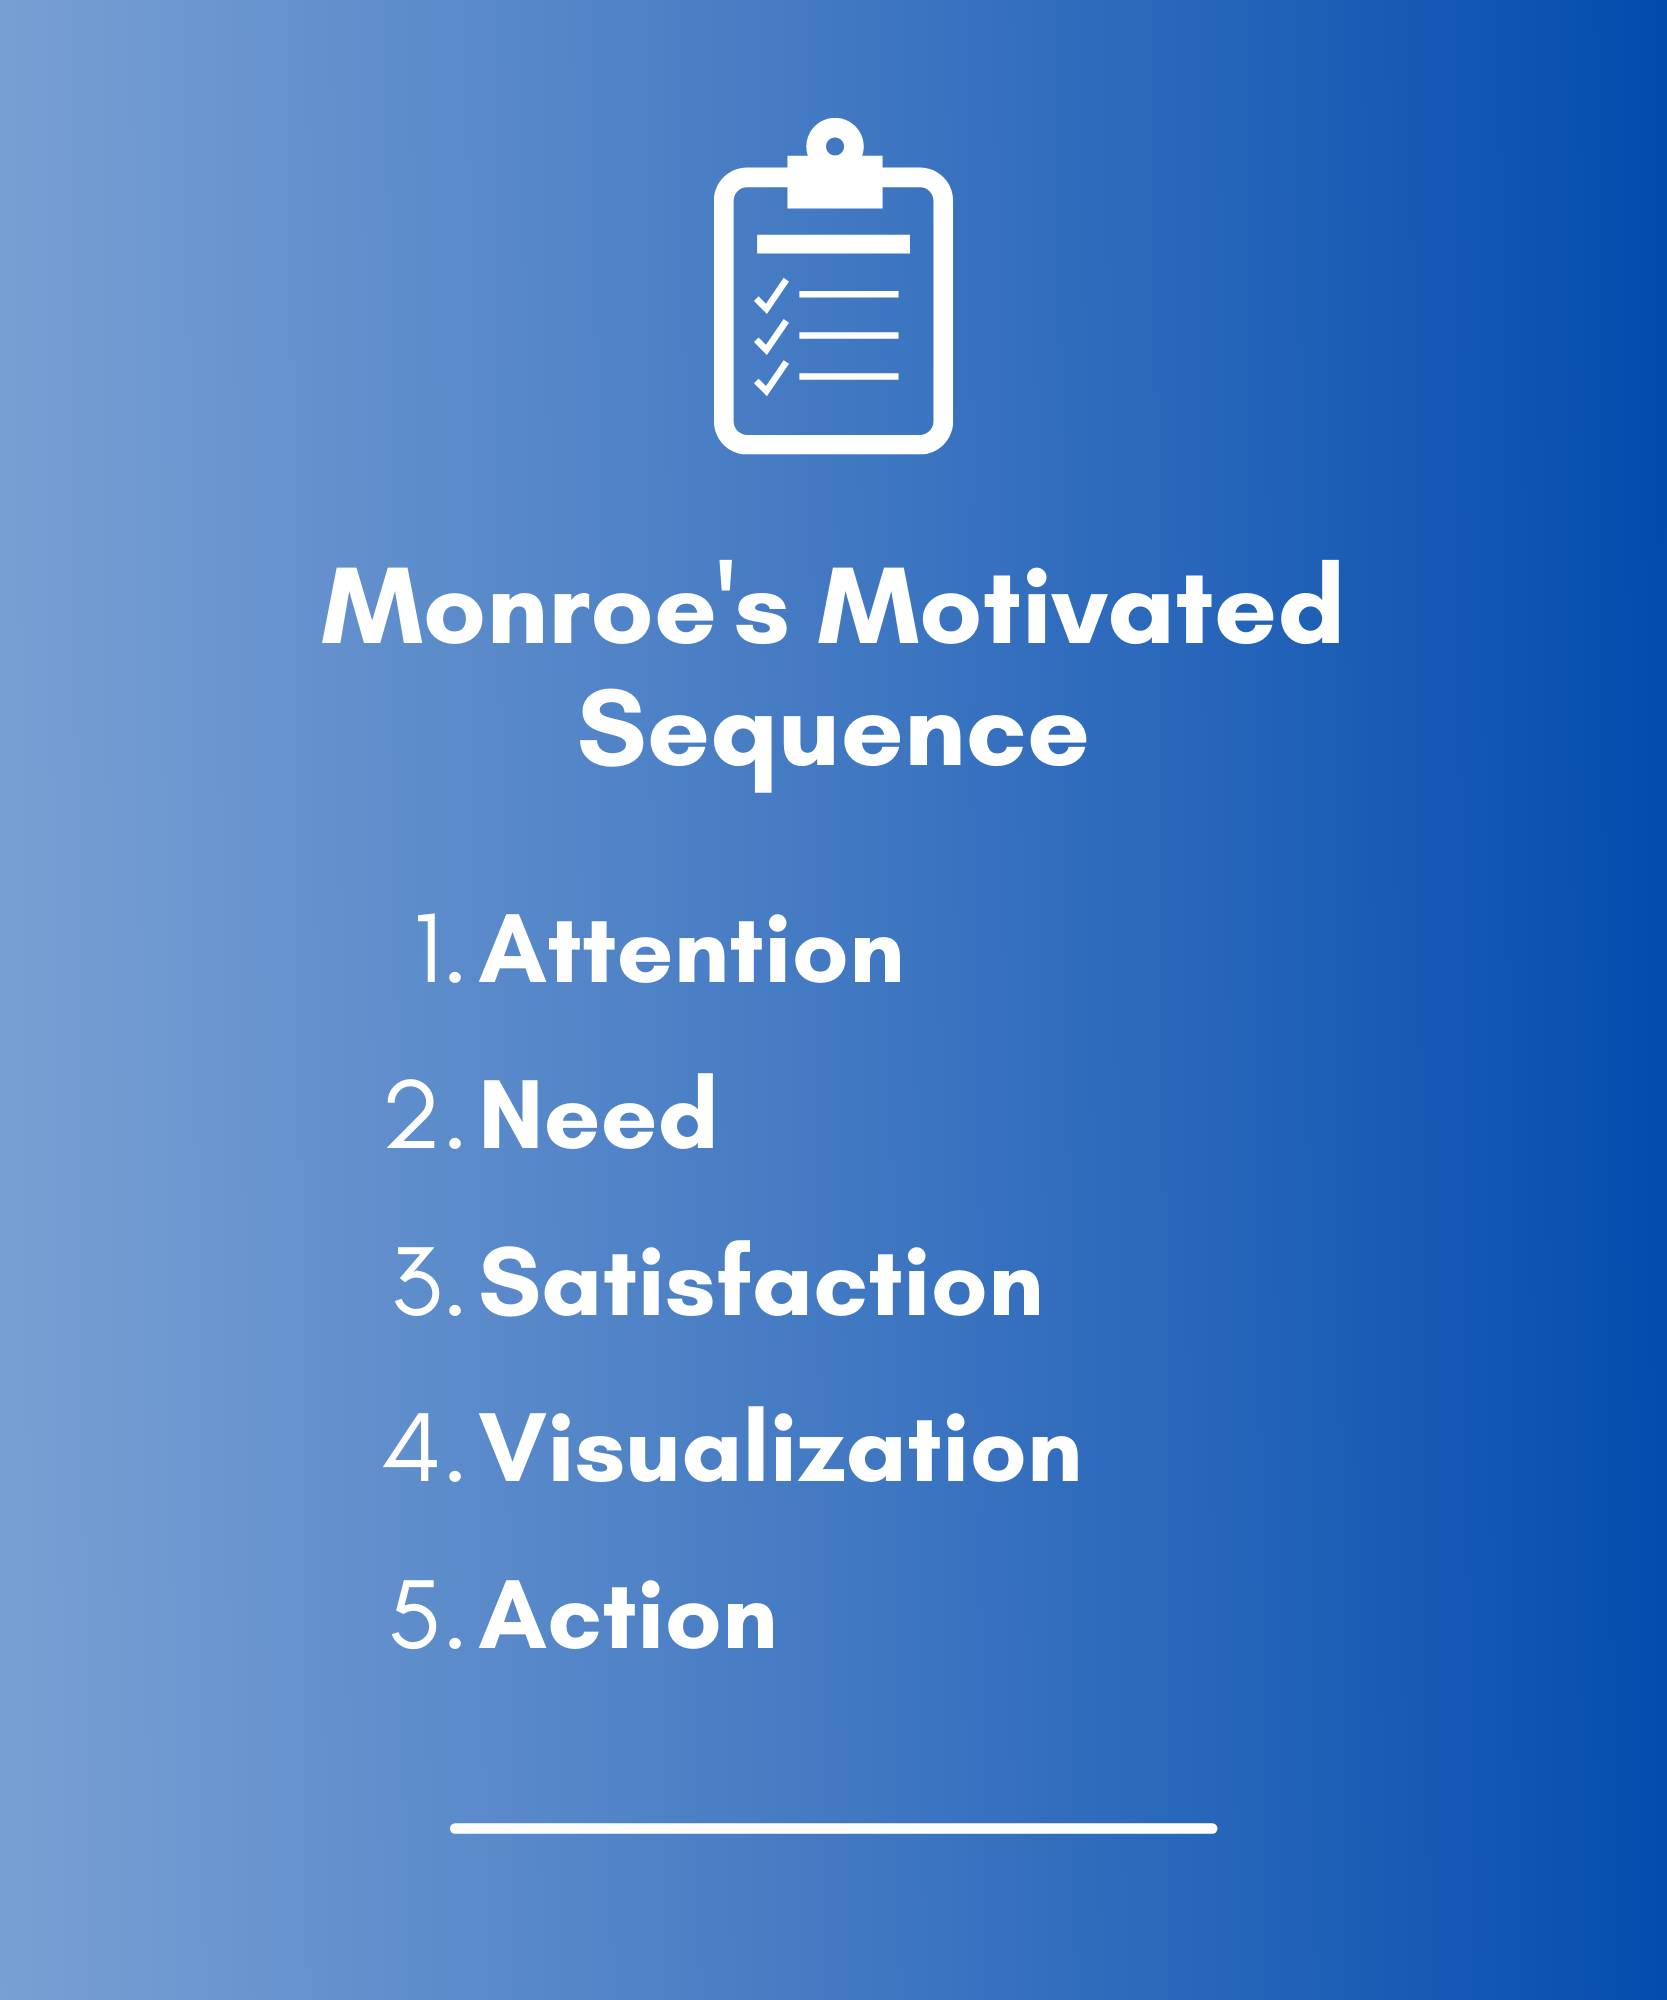 Monroe's Motivated Sequence: 1. Attention. 2. Need. 3. Satisfaction 4. Visualization 5. Action